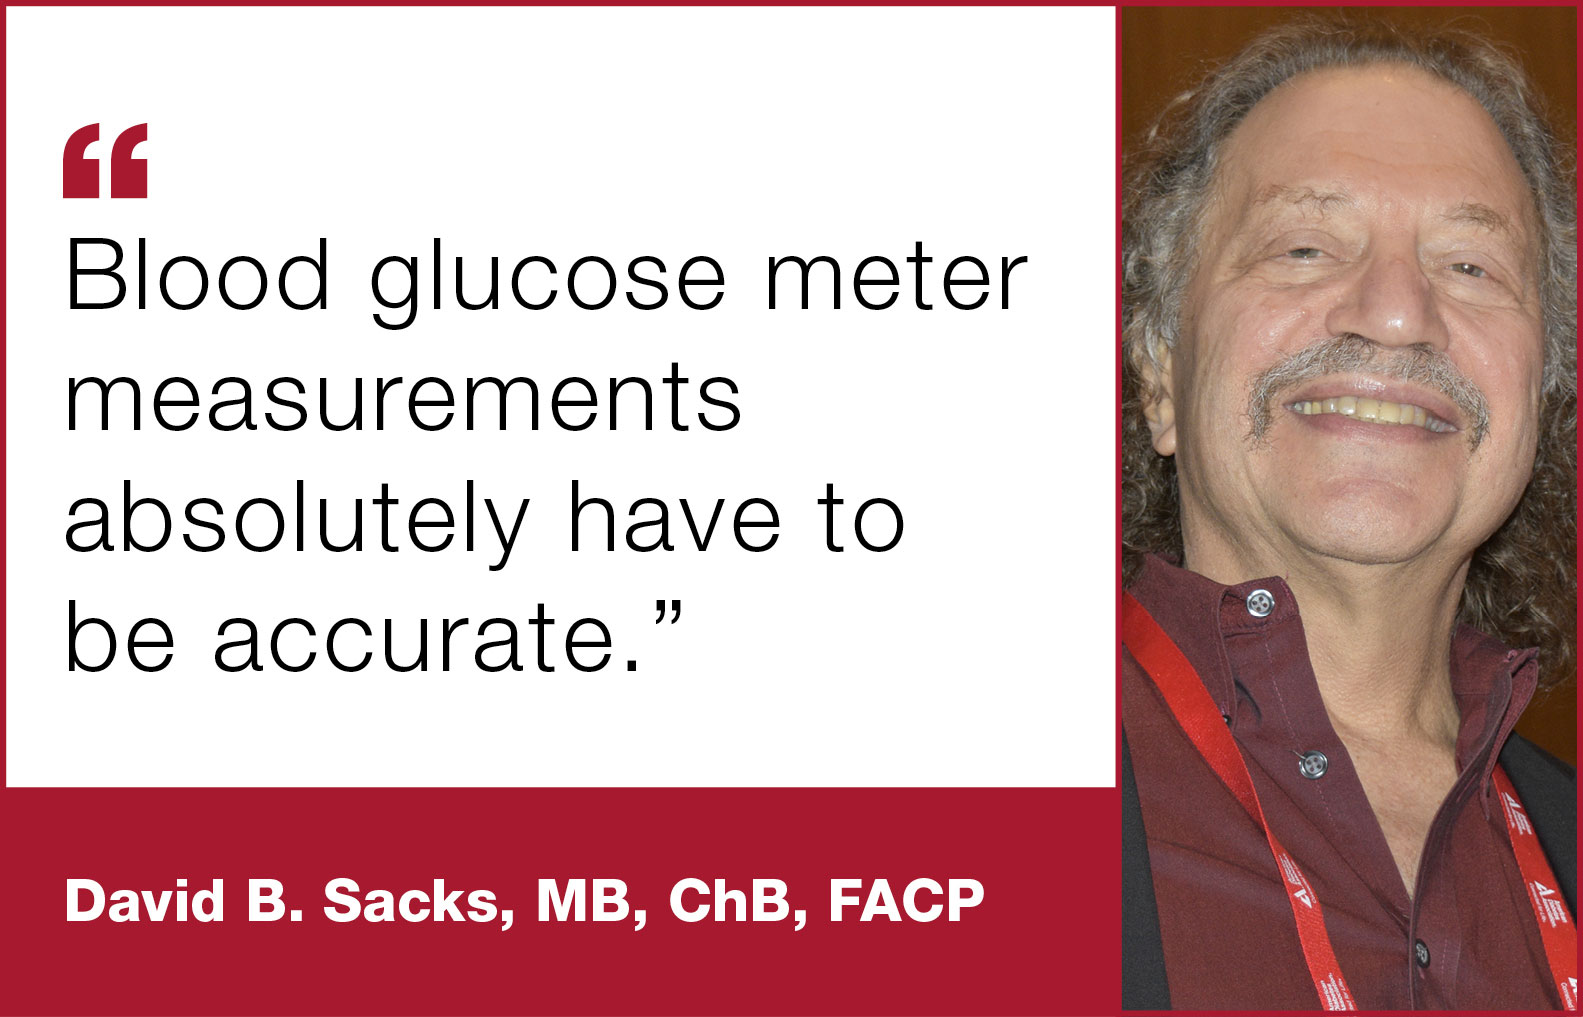 ADA/AACC Symposium reviews tools for measuring glycemia in the hospital ahead of new recommendations for analysis